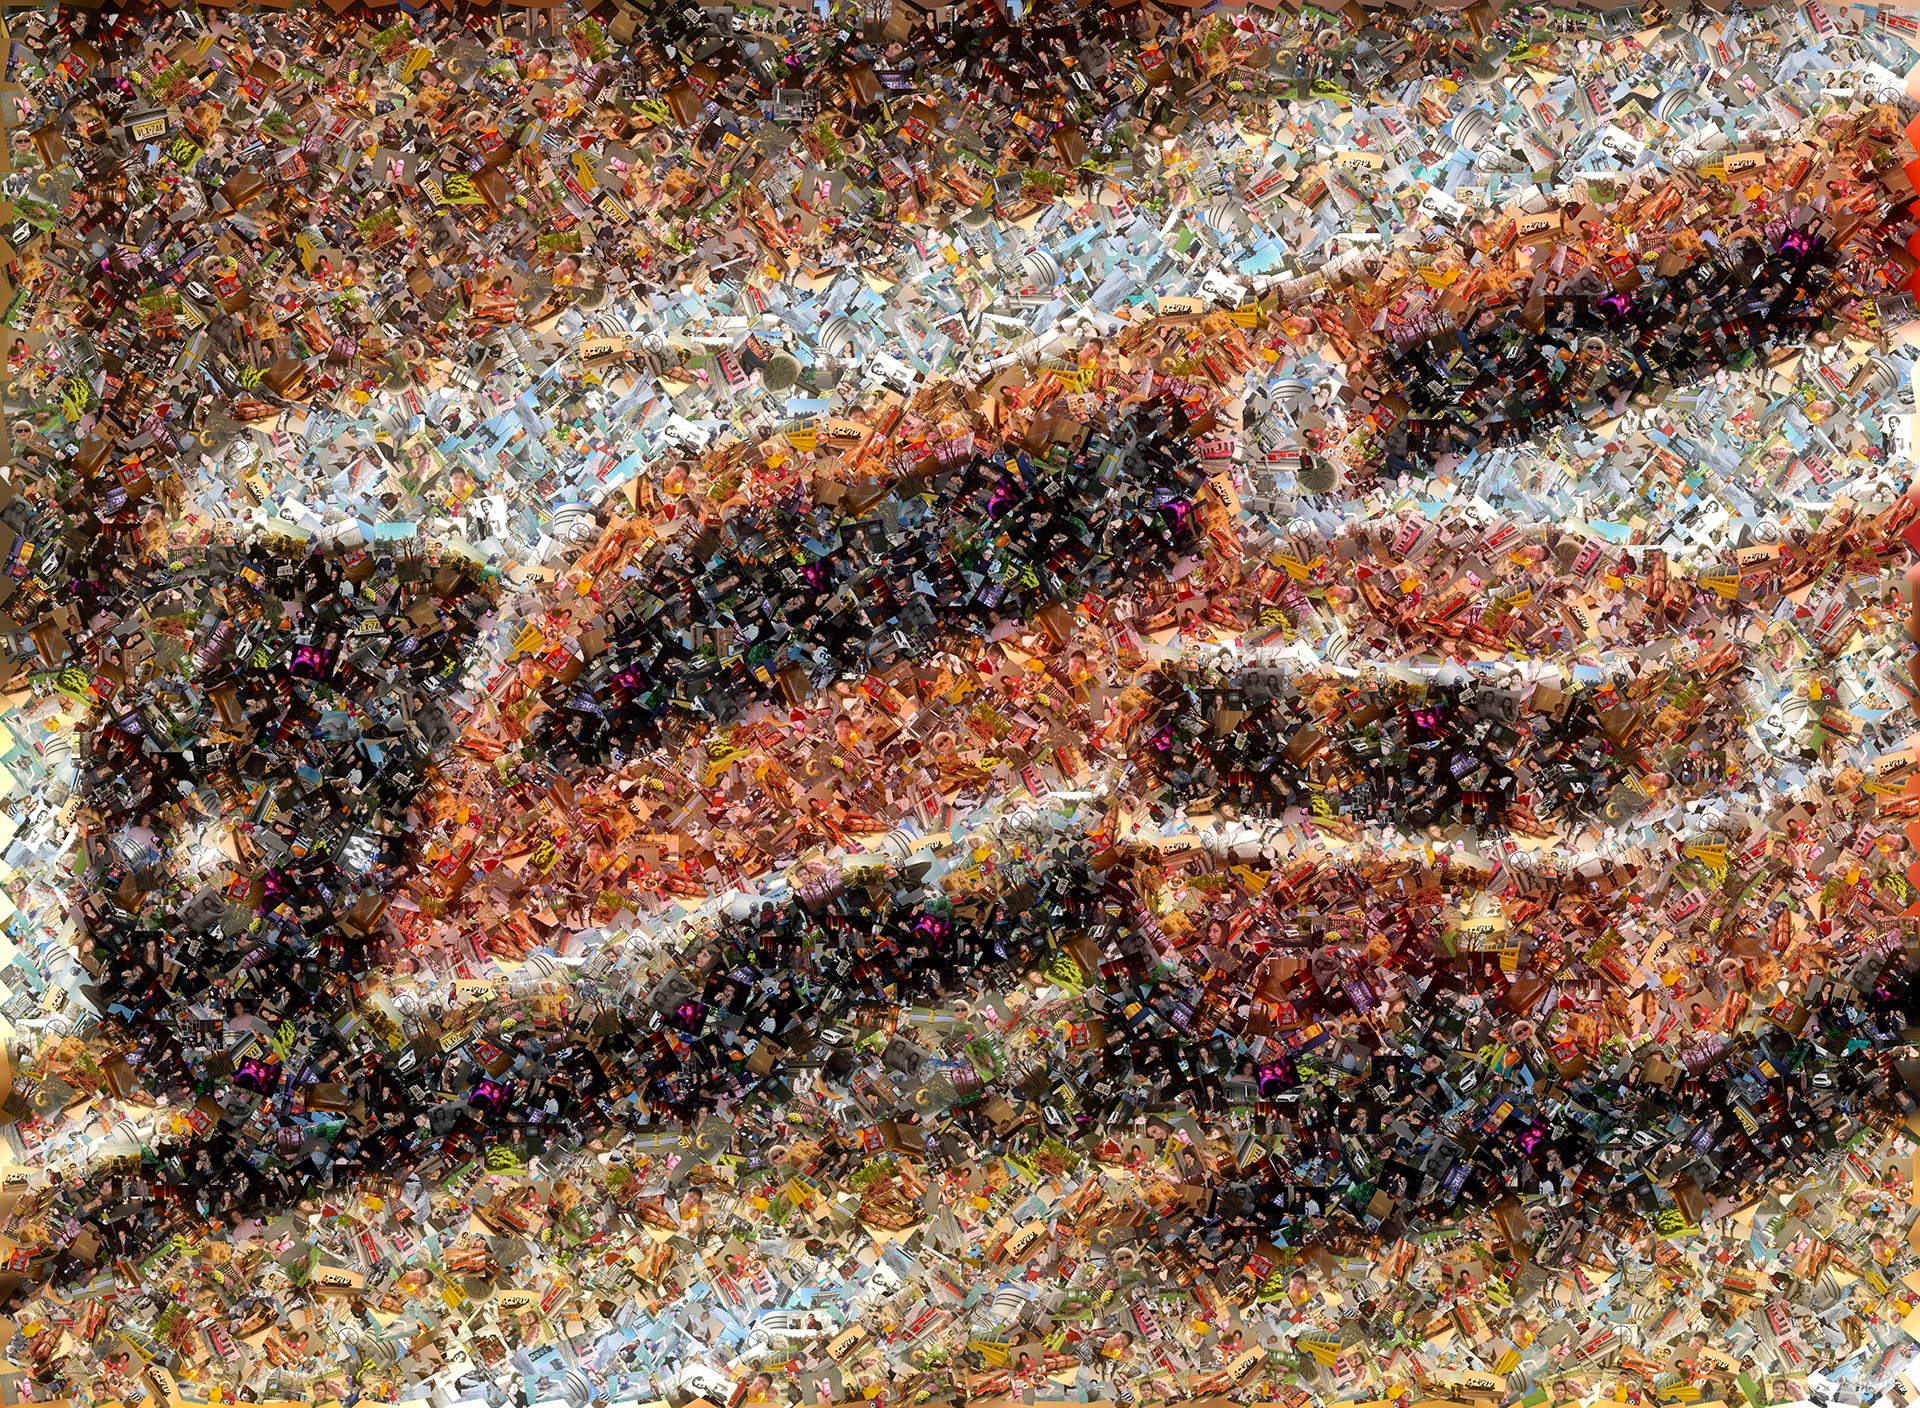 photo mosaic This scatter mosaic of an antique train toy set was created using 136 photos